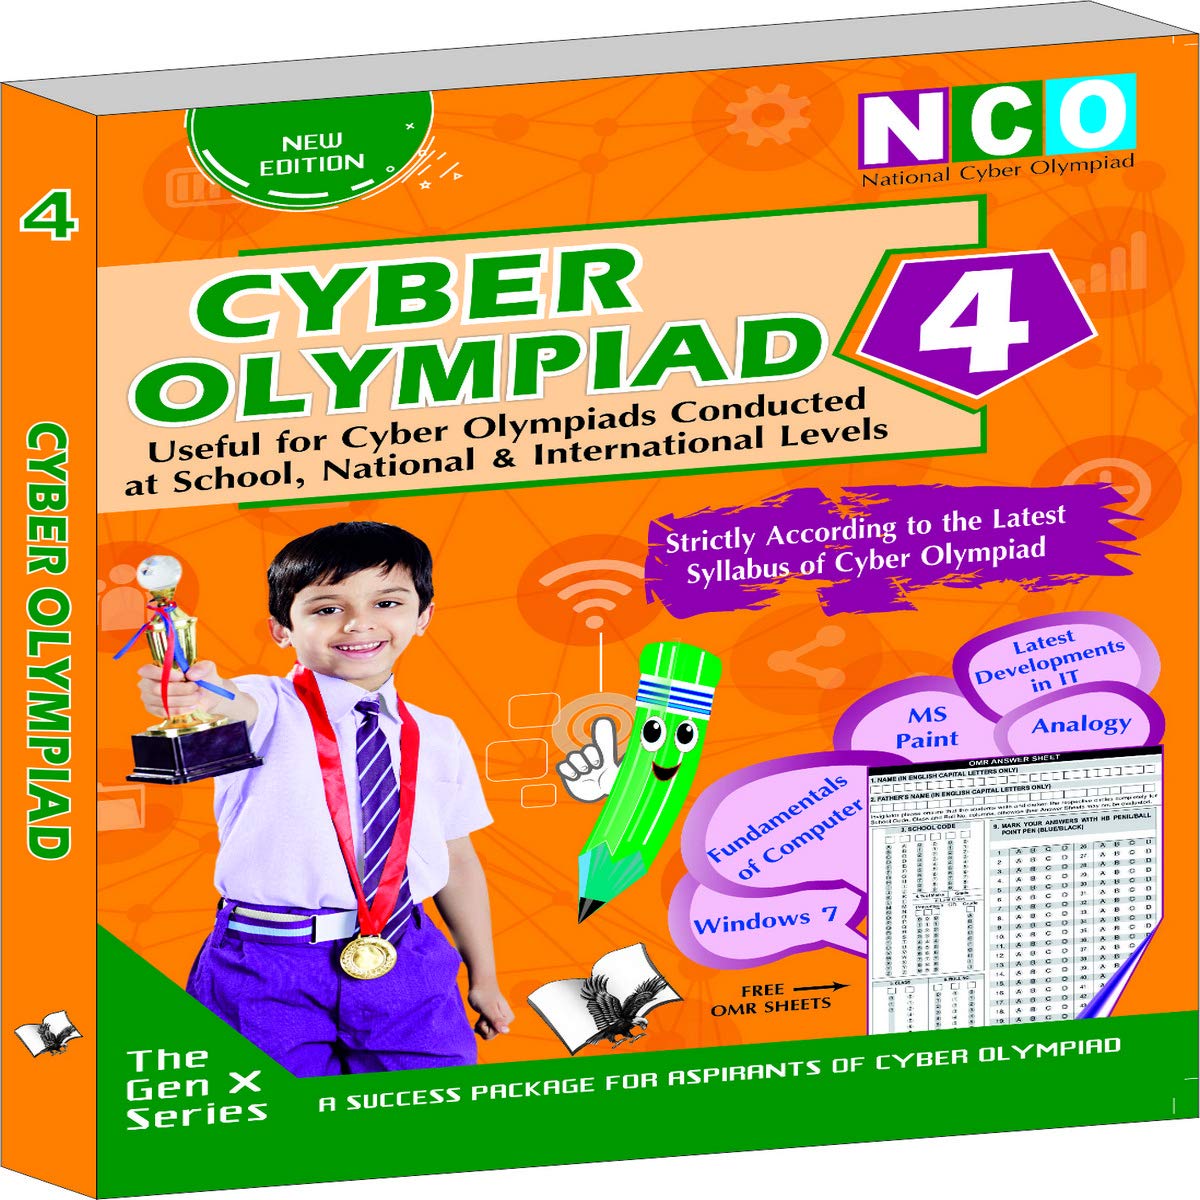 CYBER OLYMPIAD 4 (USEFUL FOR CYBER OLYMPIADS CONDUCTED AT SCHOOL, NATIONAL & INTERNATIONAL LEVELS)